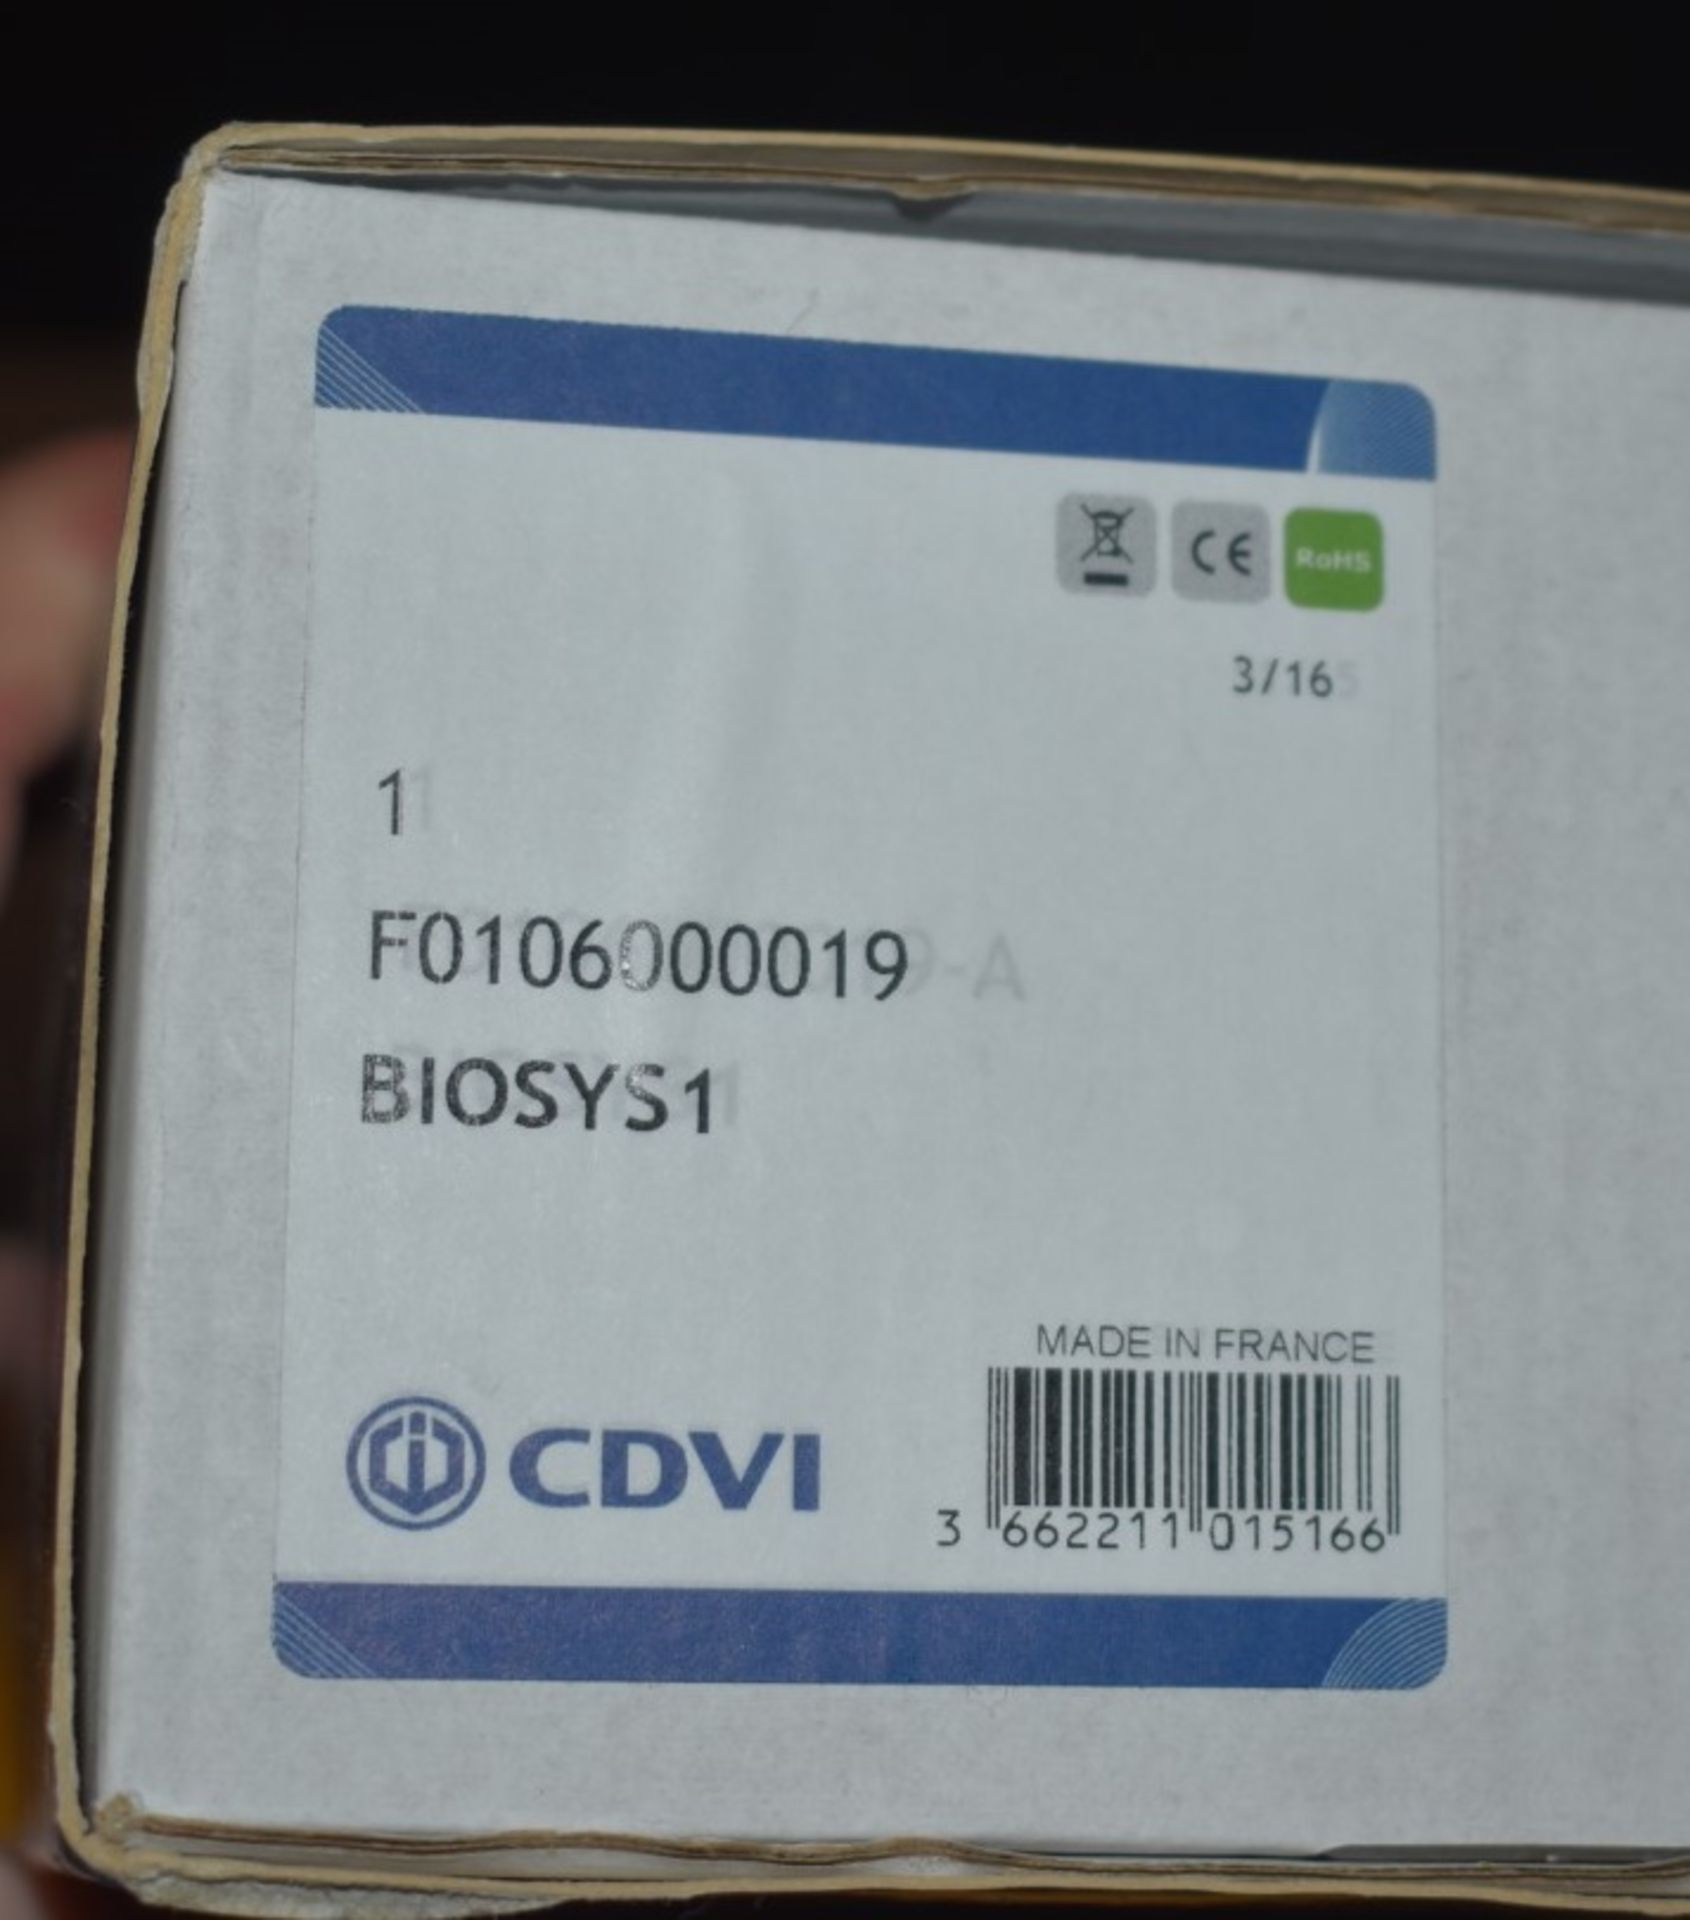 1 x CDVI BIOSYS1 Biometric Fingerprint Reader - New and Boxed - RRP £500 - Ref: In2137 wh1 pal1 - - Image 4 of 4